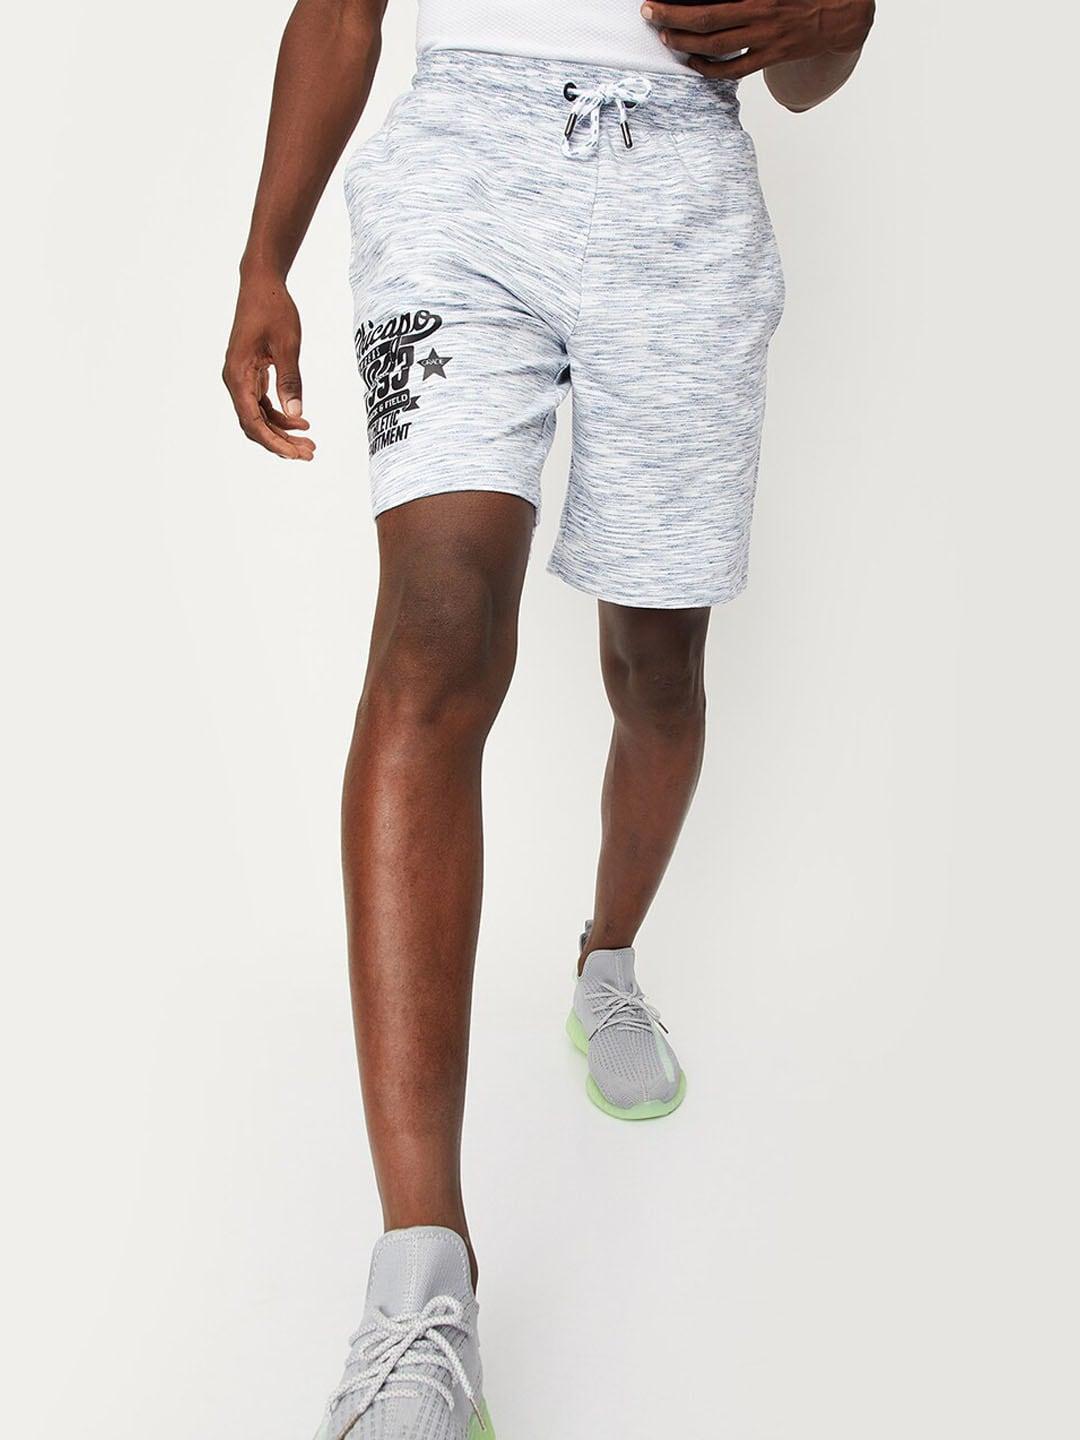 max-men-typography-printed-mid-rise-shorts